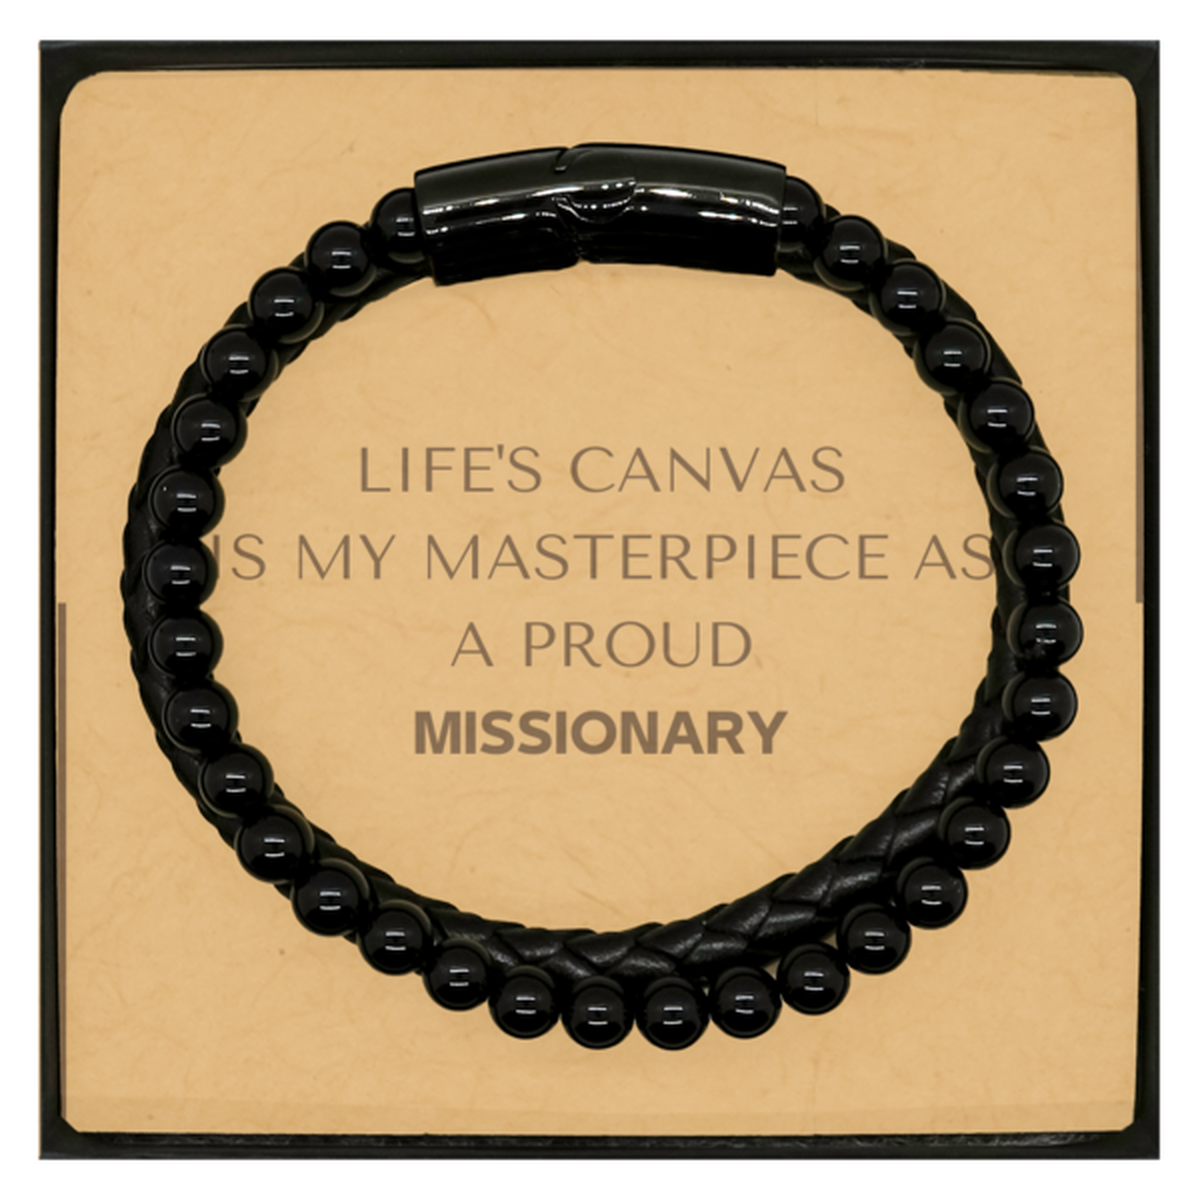 Proud Missionary Gifts, Life's canvas is my masterpiece, Epic Birthday Christmas Unique Stone Leather Bracelets For Missionary, Coworkers, Men, Women, Friends